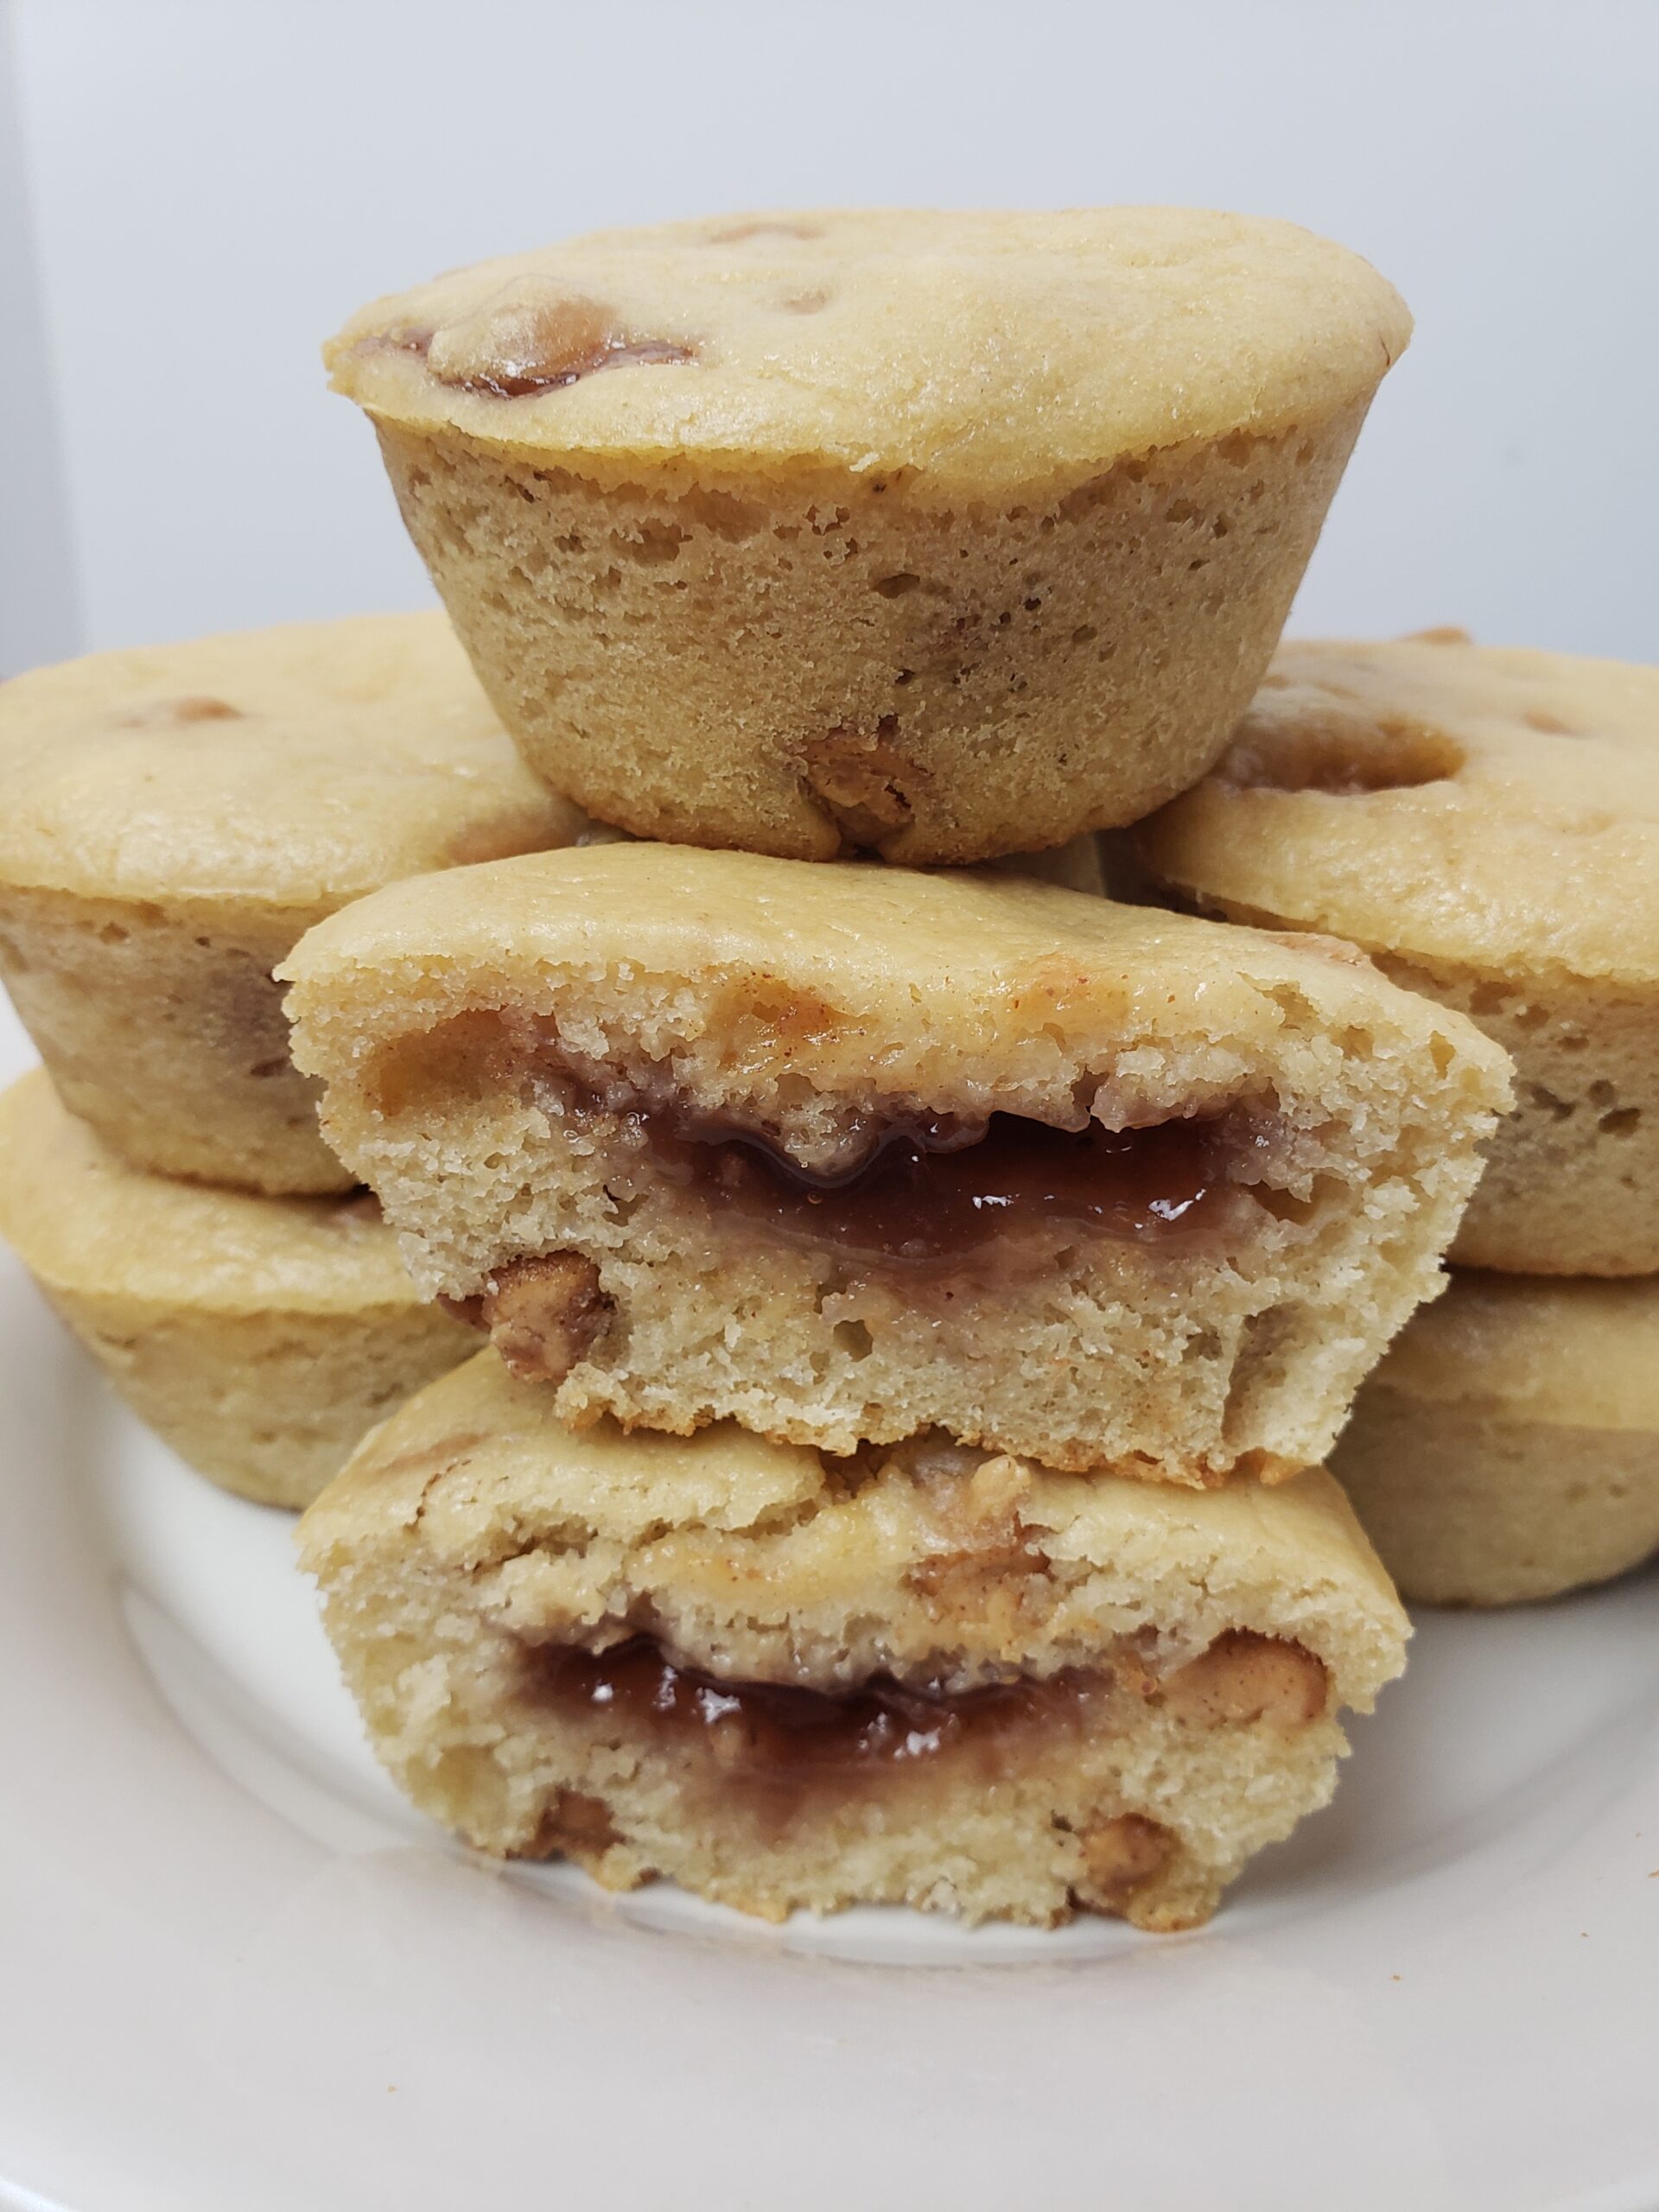 Peanut Butter Jelly Muffins piled on a plate.